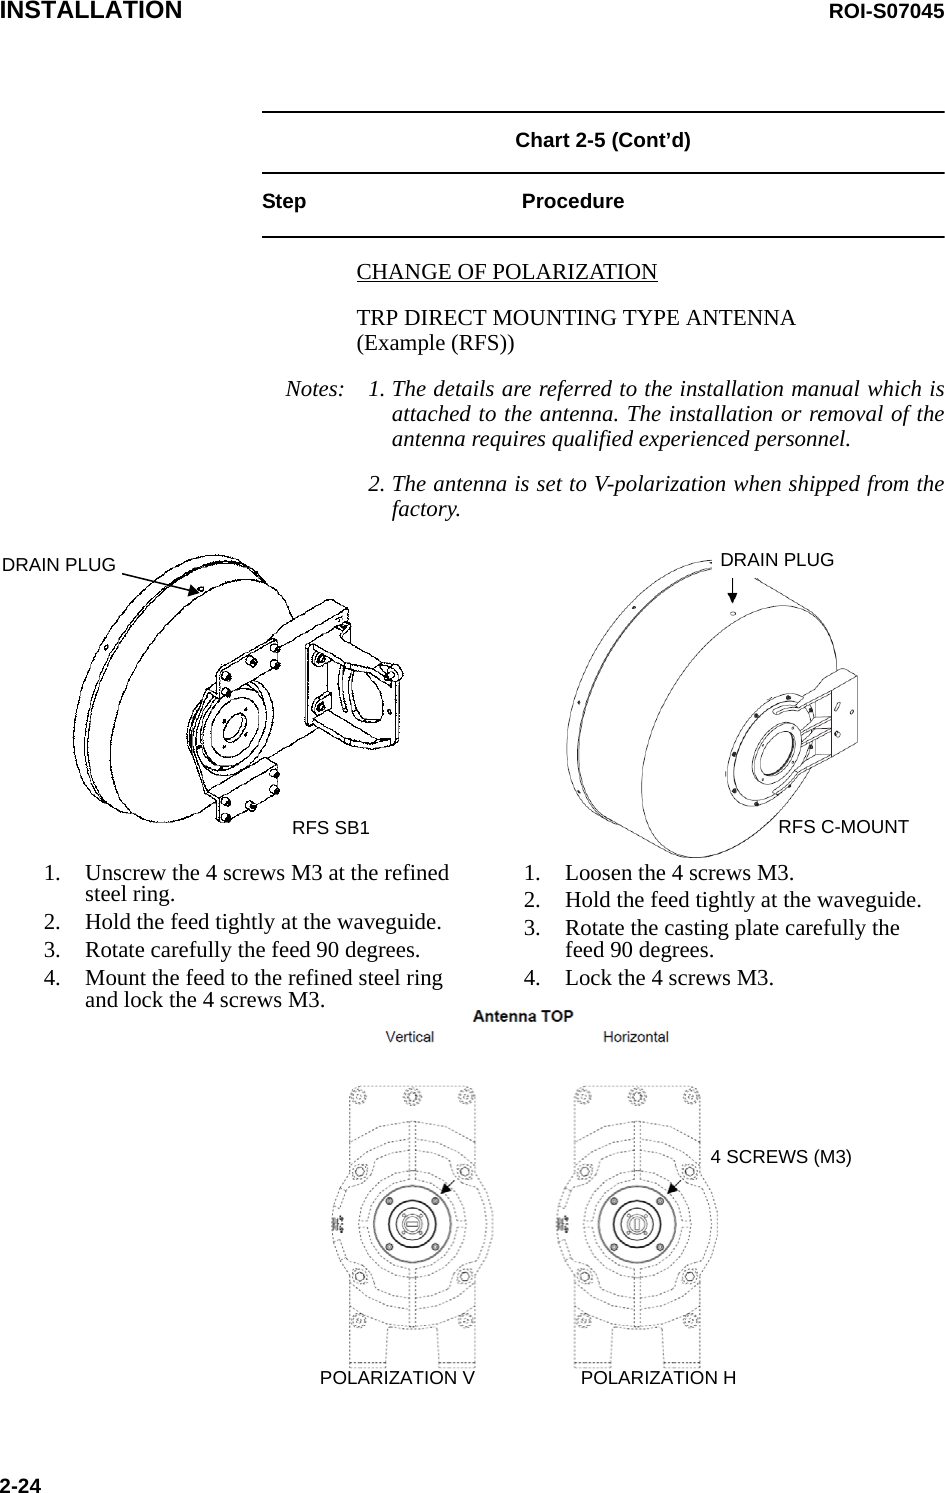 INSTALLATION ROI-S070452-24Chart 2-5 (Cont’d)Step ProcedureCHANGE OF POLARIZATIONTRP DIRECT MOUNTING TYPE ANTENNA(Example (RFS))Notes: 1. The details are referred to the installation manual which isattached to the antenna. The installation or removal of theantenna requires qualified experienced personnel.2. The antenna is set to V-polarization when shipped from thefactory.4 SCREWS (M3)RFS SB11. Unscrew the 4 screws M3 at the refined steel ring.2. Hold the feed tightly at the waveguide.3. Rotate carefully the feed 90 degrees.4. Mount the feed to the refined steel ring and lock the 4 screws M3.RFS C-MOUNTDRAIN PLUGDRAIN PLUGPOLARIZATION V POLARIZATION H1. Loosen the 4 screws M3.2. Hold the feed tightly at the waveguide.3. Rotate the casting plate carefully the feed 90 degrees.4. Lock the 4 screws M3.